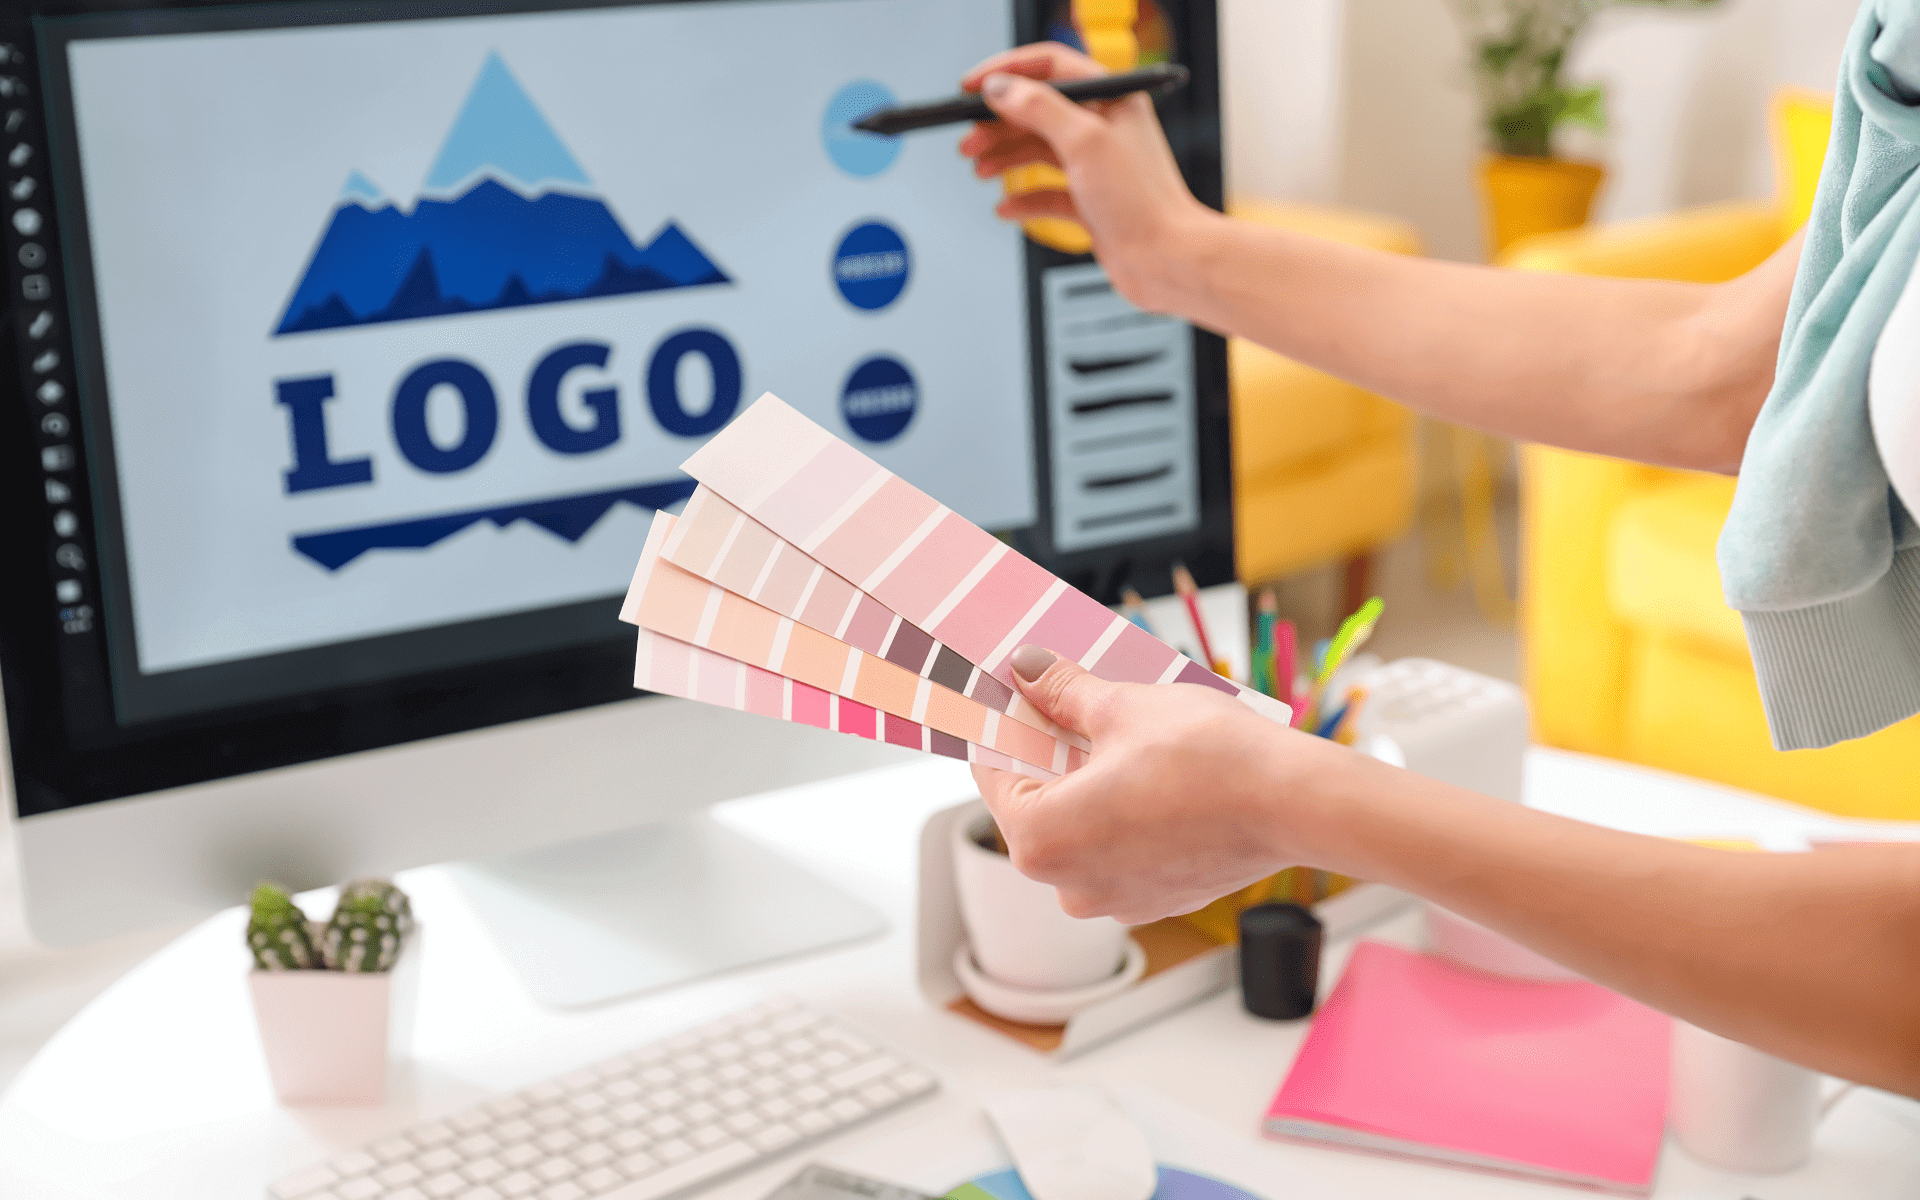 A graphic designer creating an appealing brand logo